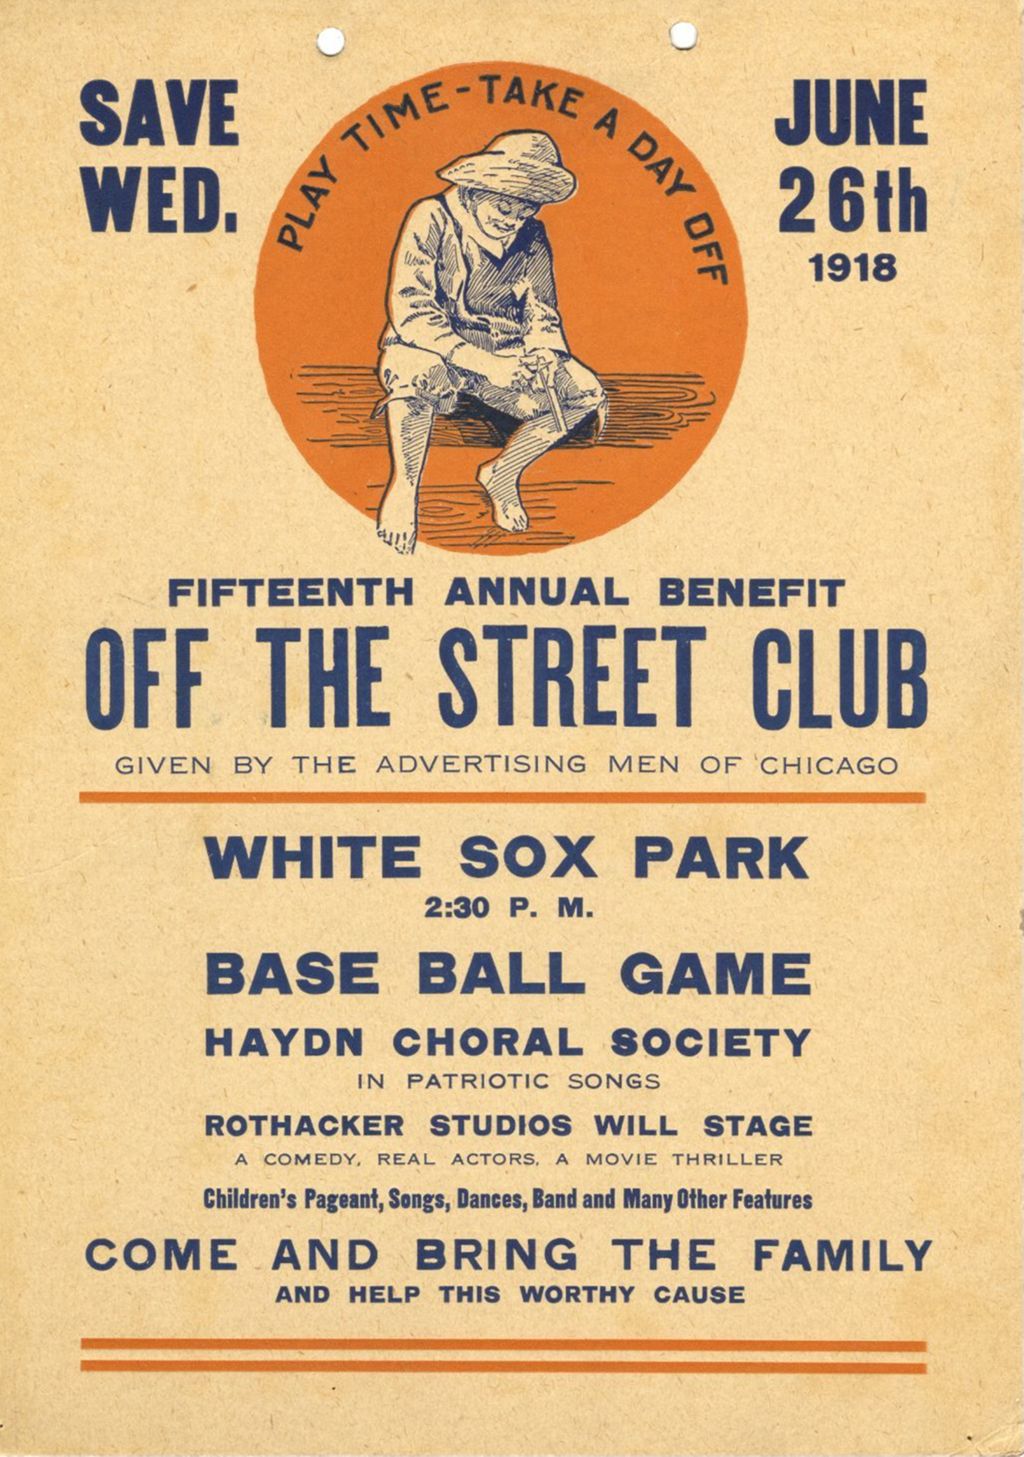 Miniature of Off-The-Street Club annual benefit flyer